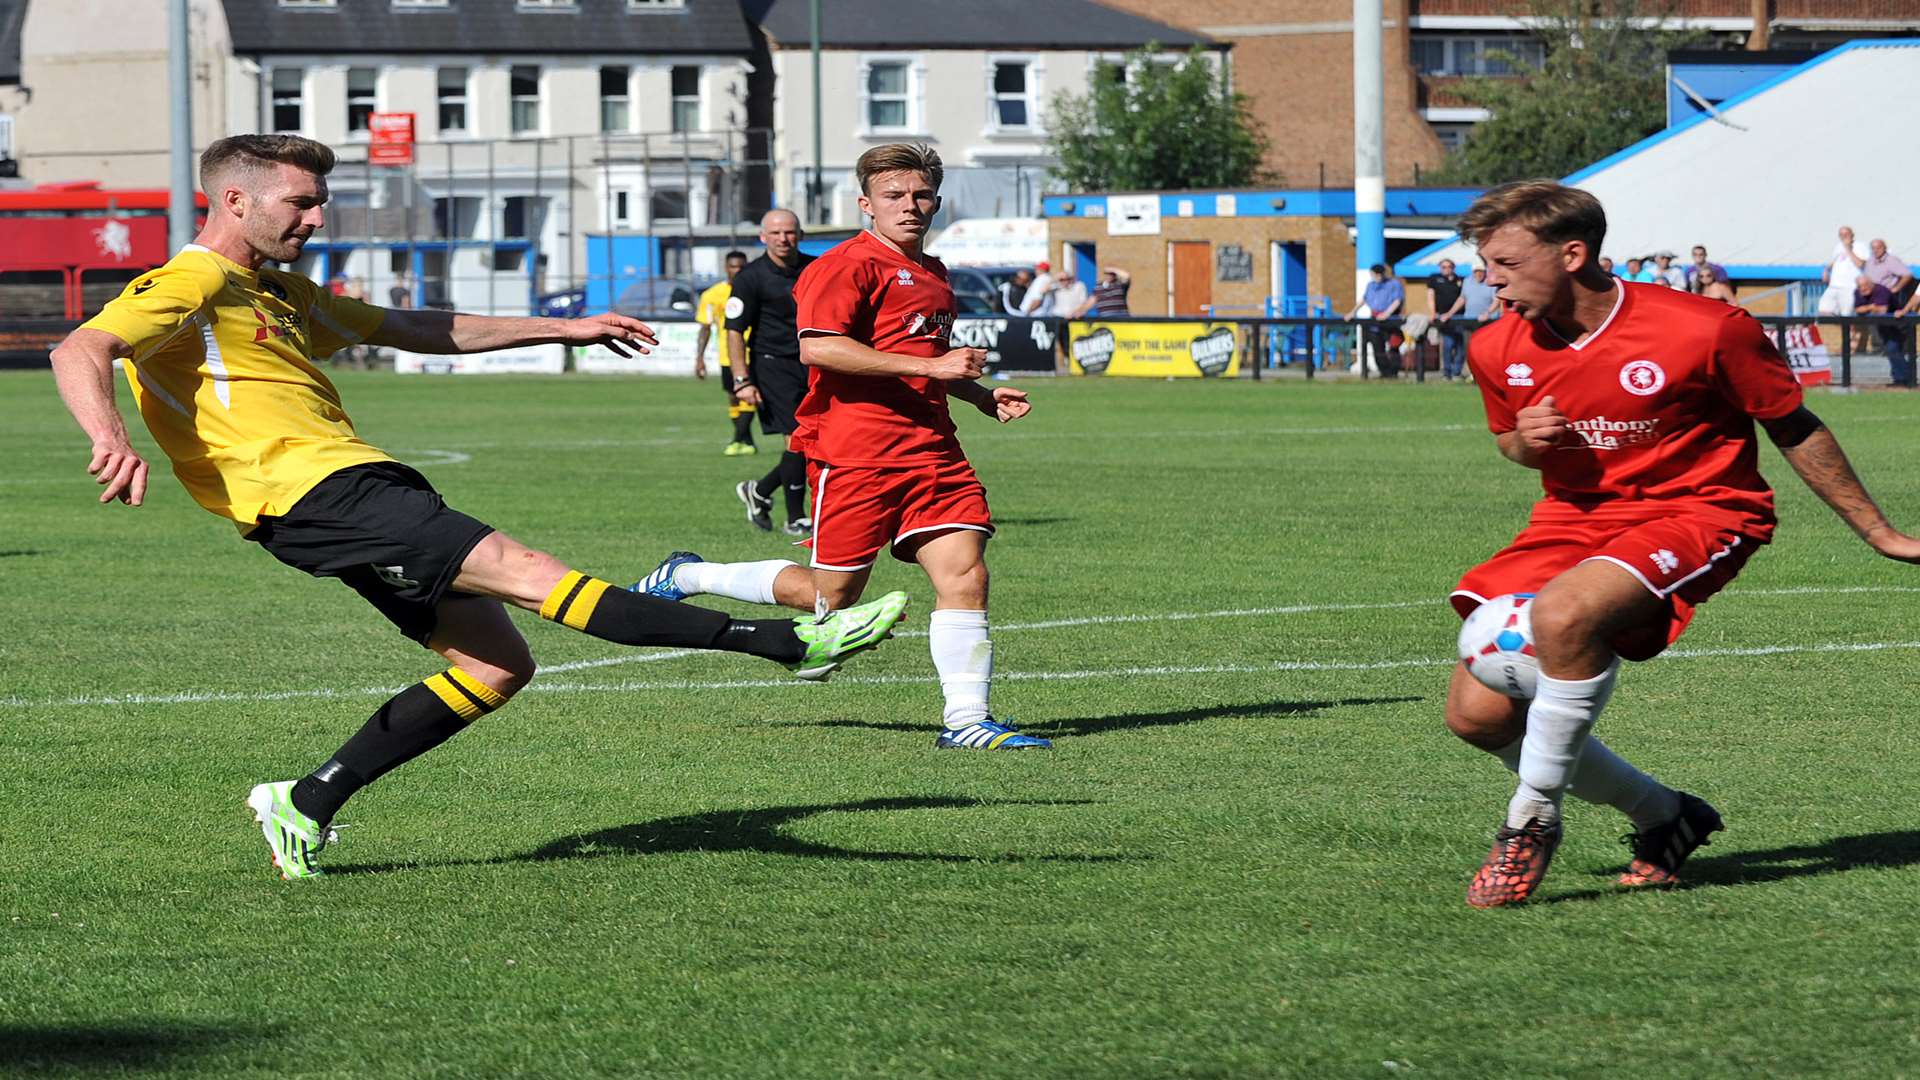 Former Fleet loan player Ben Jefford feels the force of this shot. Picture: David Brown